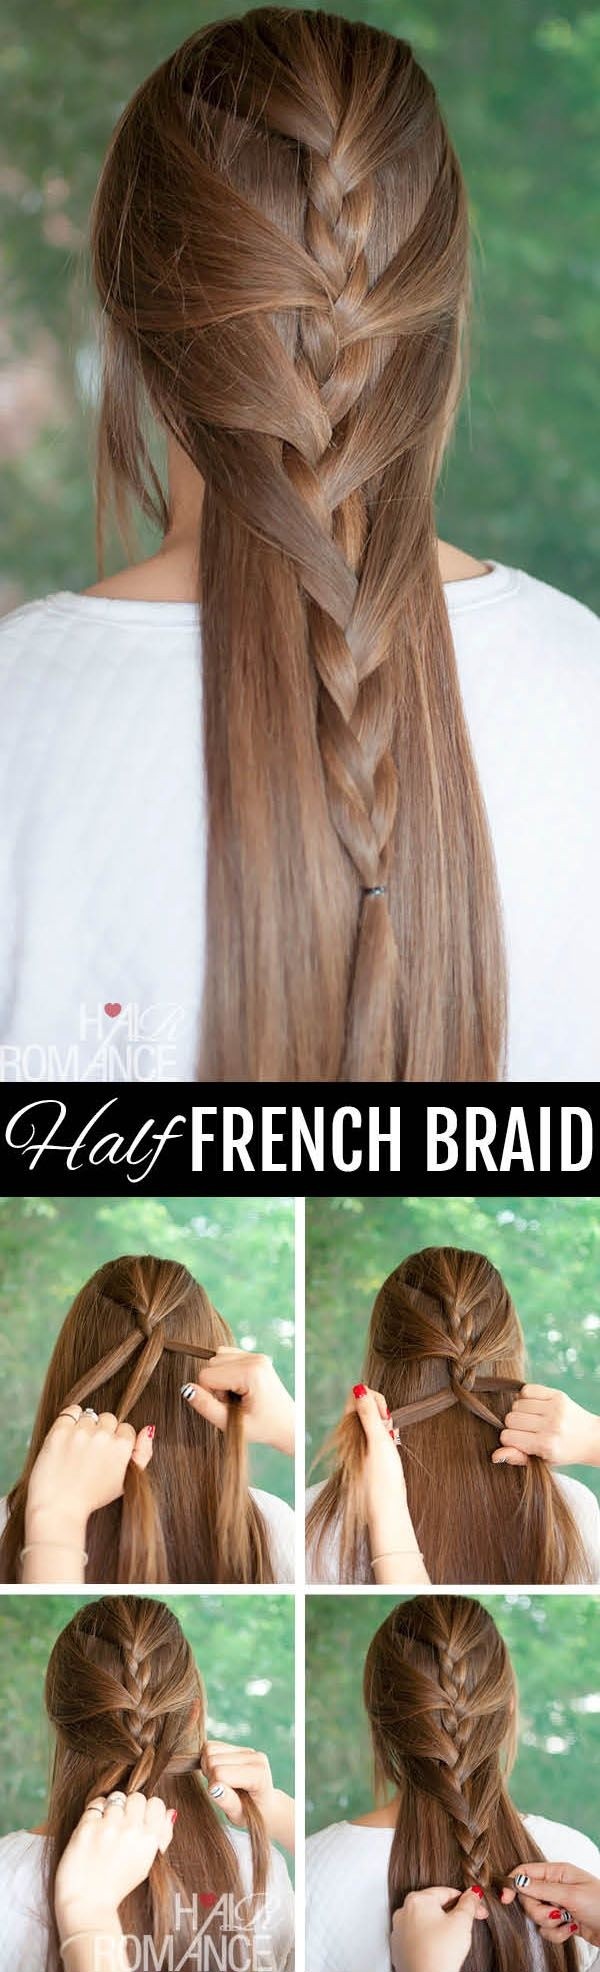 Half French Braided Hairstyle Tutorial